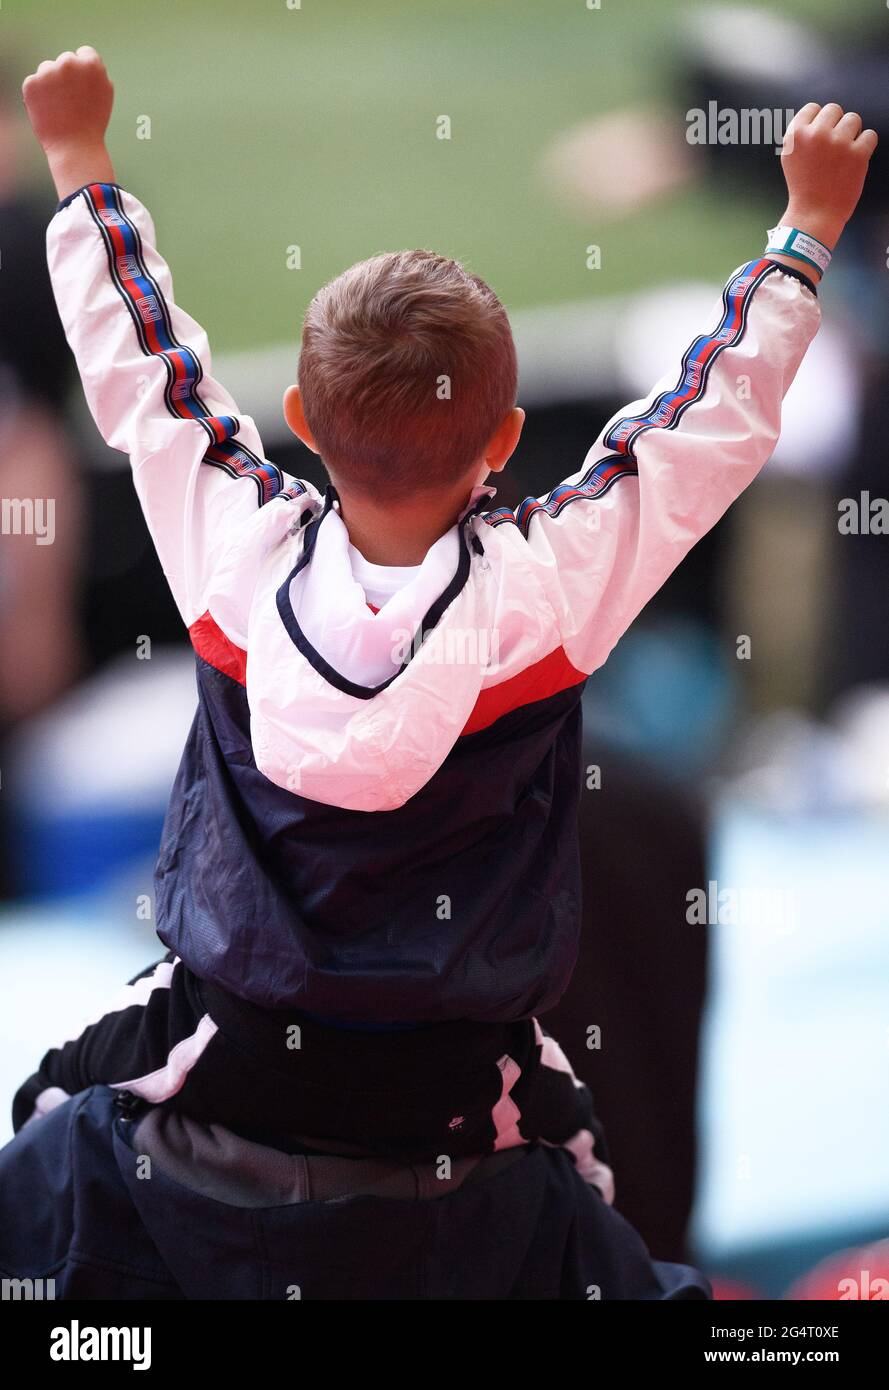 London, UK. 22nd June 2021 - England v Scotland - UEFA Euro 2020 Group D Match - Wembley - London  A young England fan celebrates victory on his Dad's shoulders during the Euro 2020 match against Czech Republic. Picture Credit : © Mark Pain / Alamy Live News Stock Photo